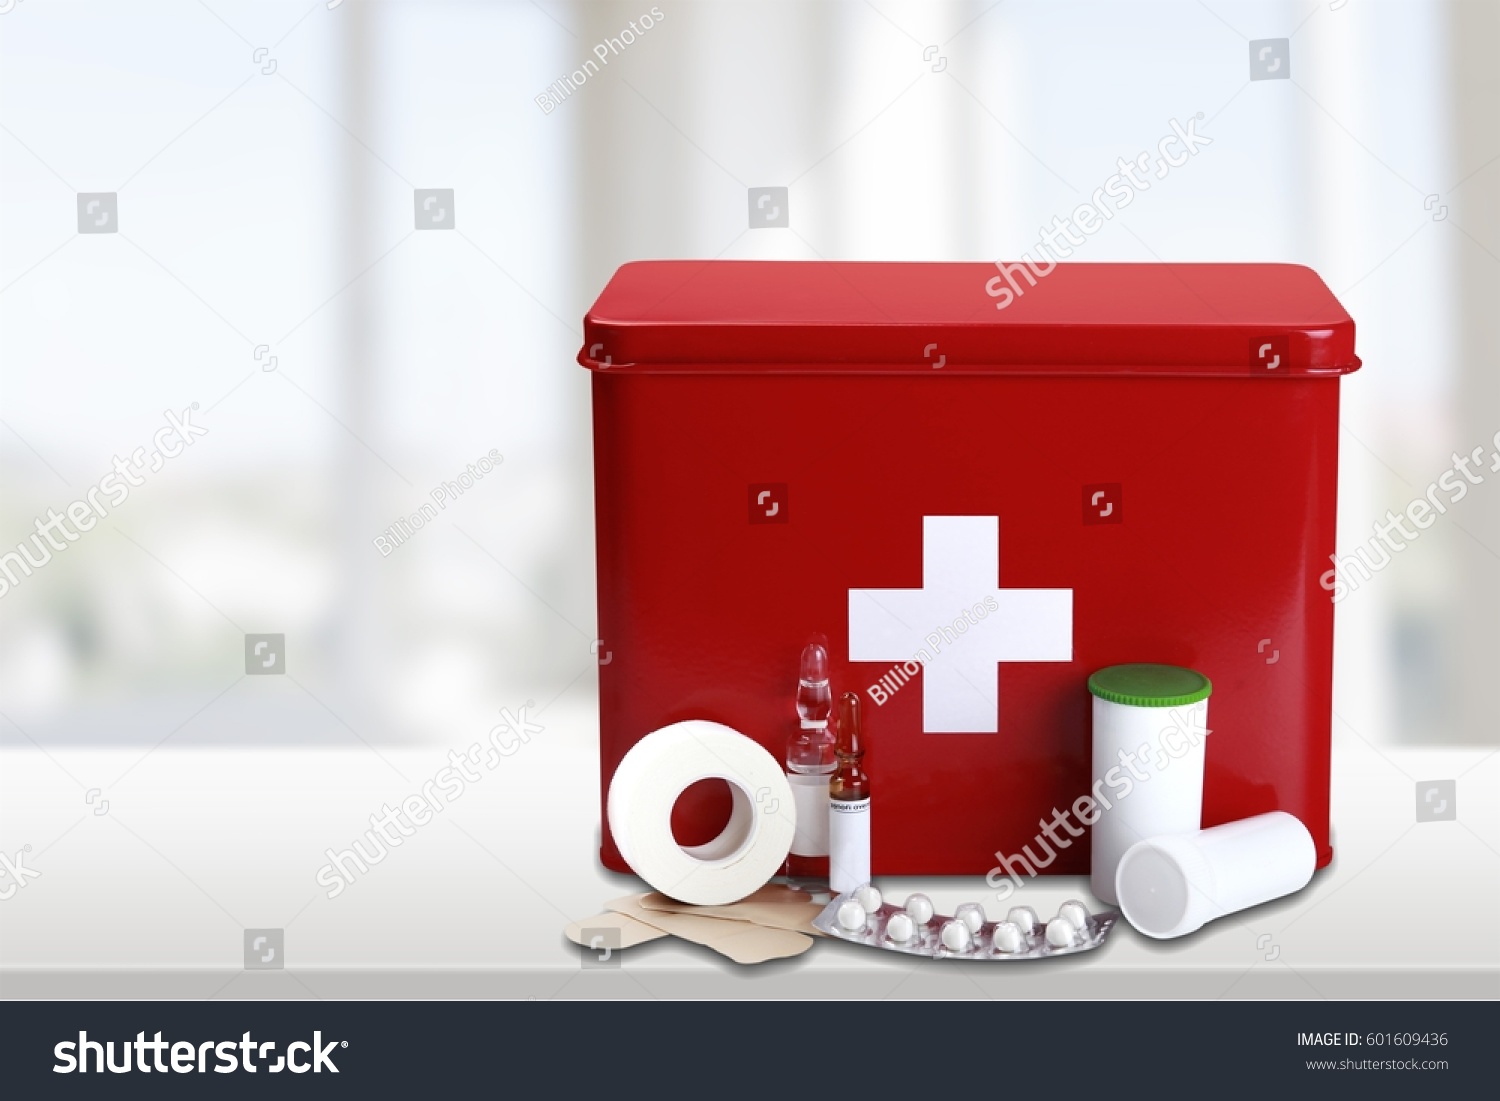 First aid kit. #601609436